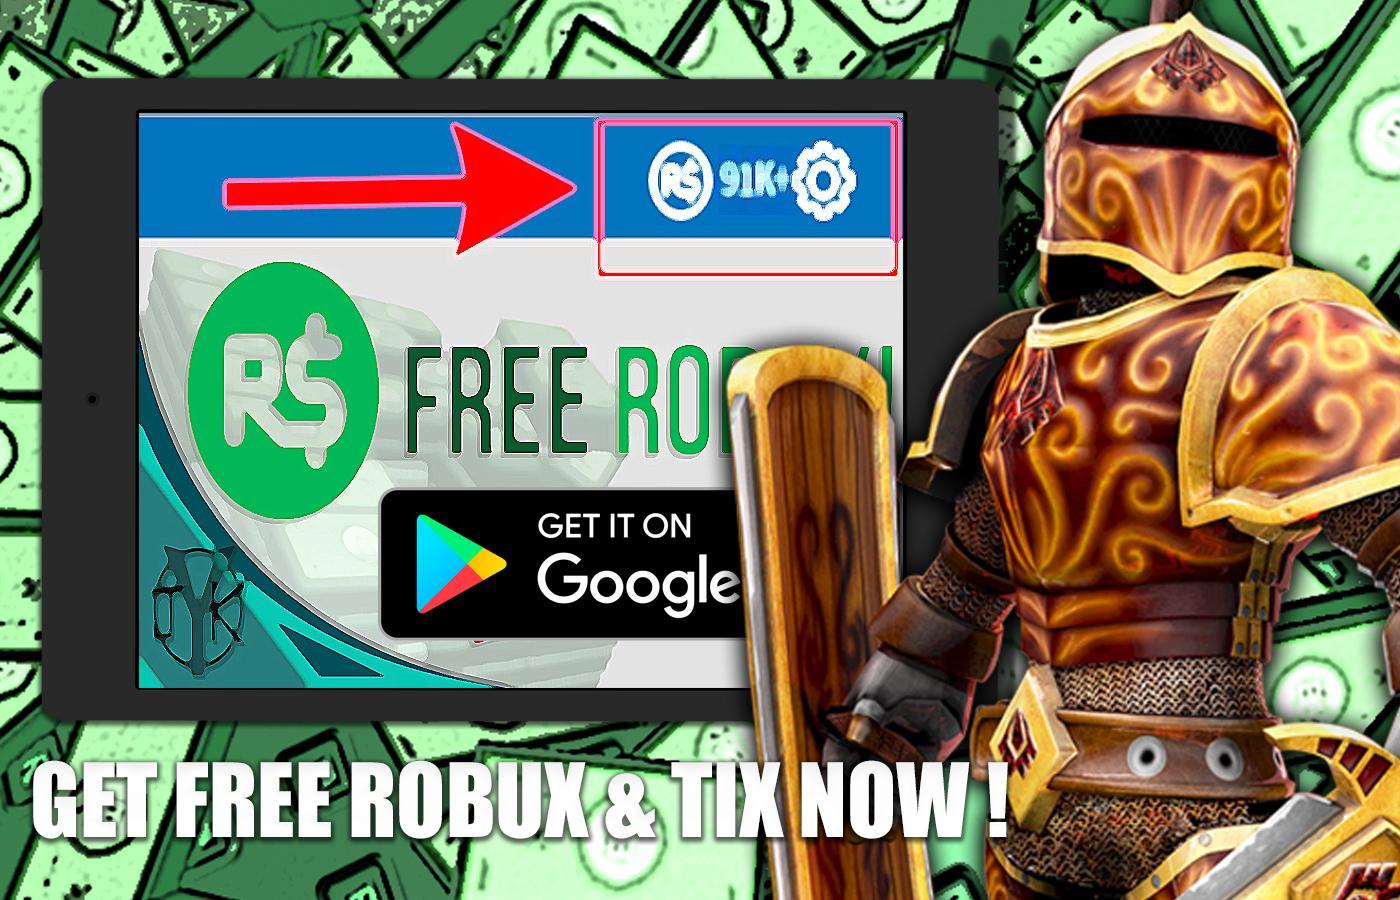 Free Robux Code Generator Prank For Android Apk Download - free robux code generator prank apk download latest